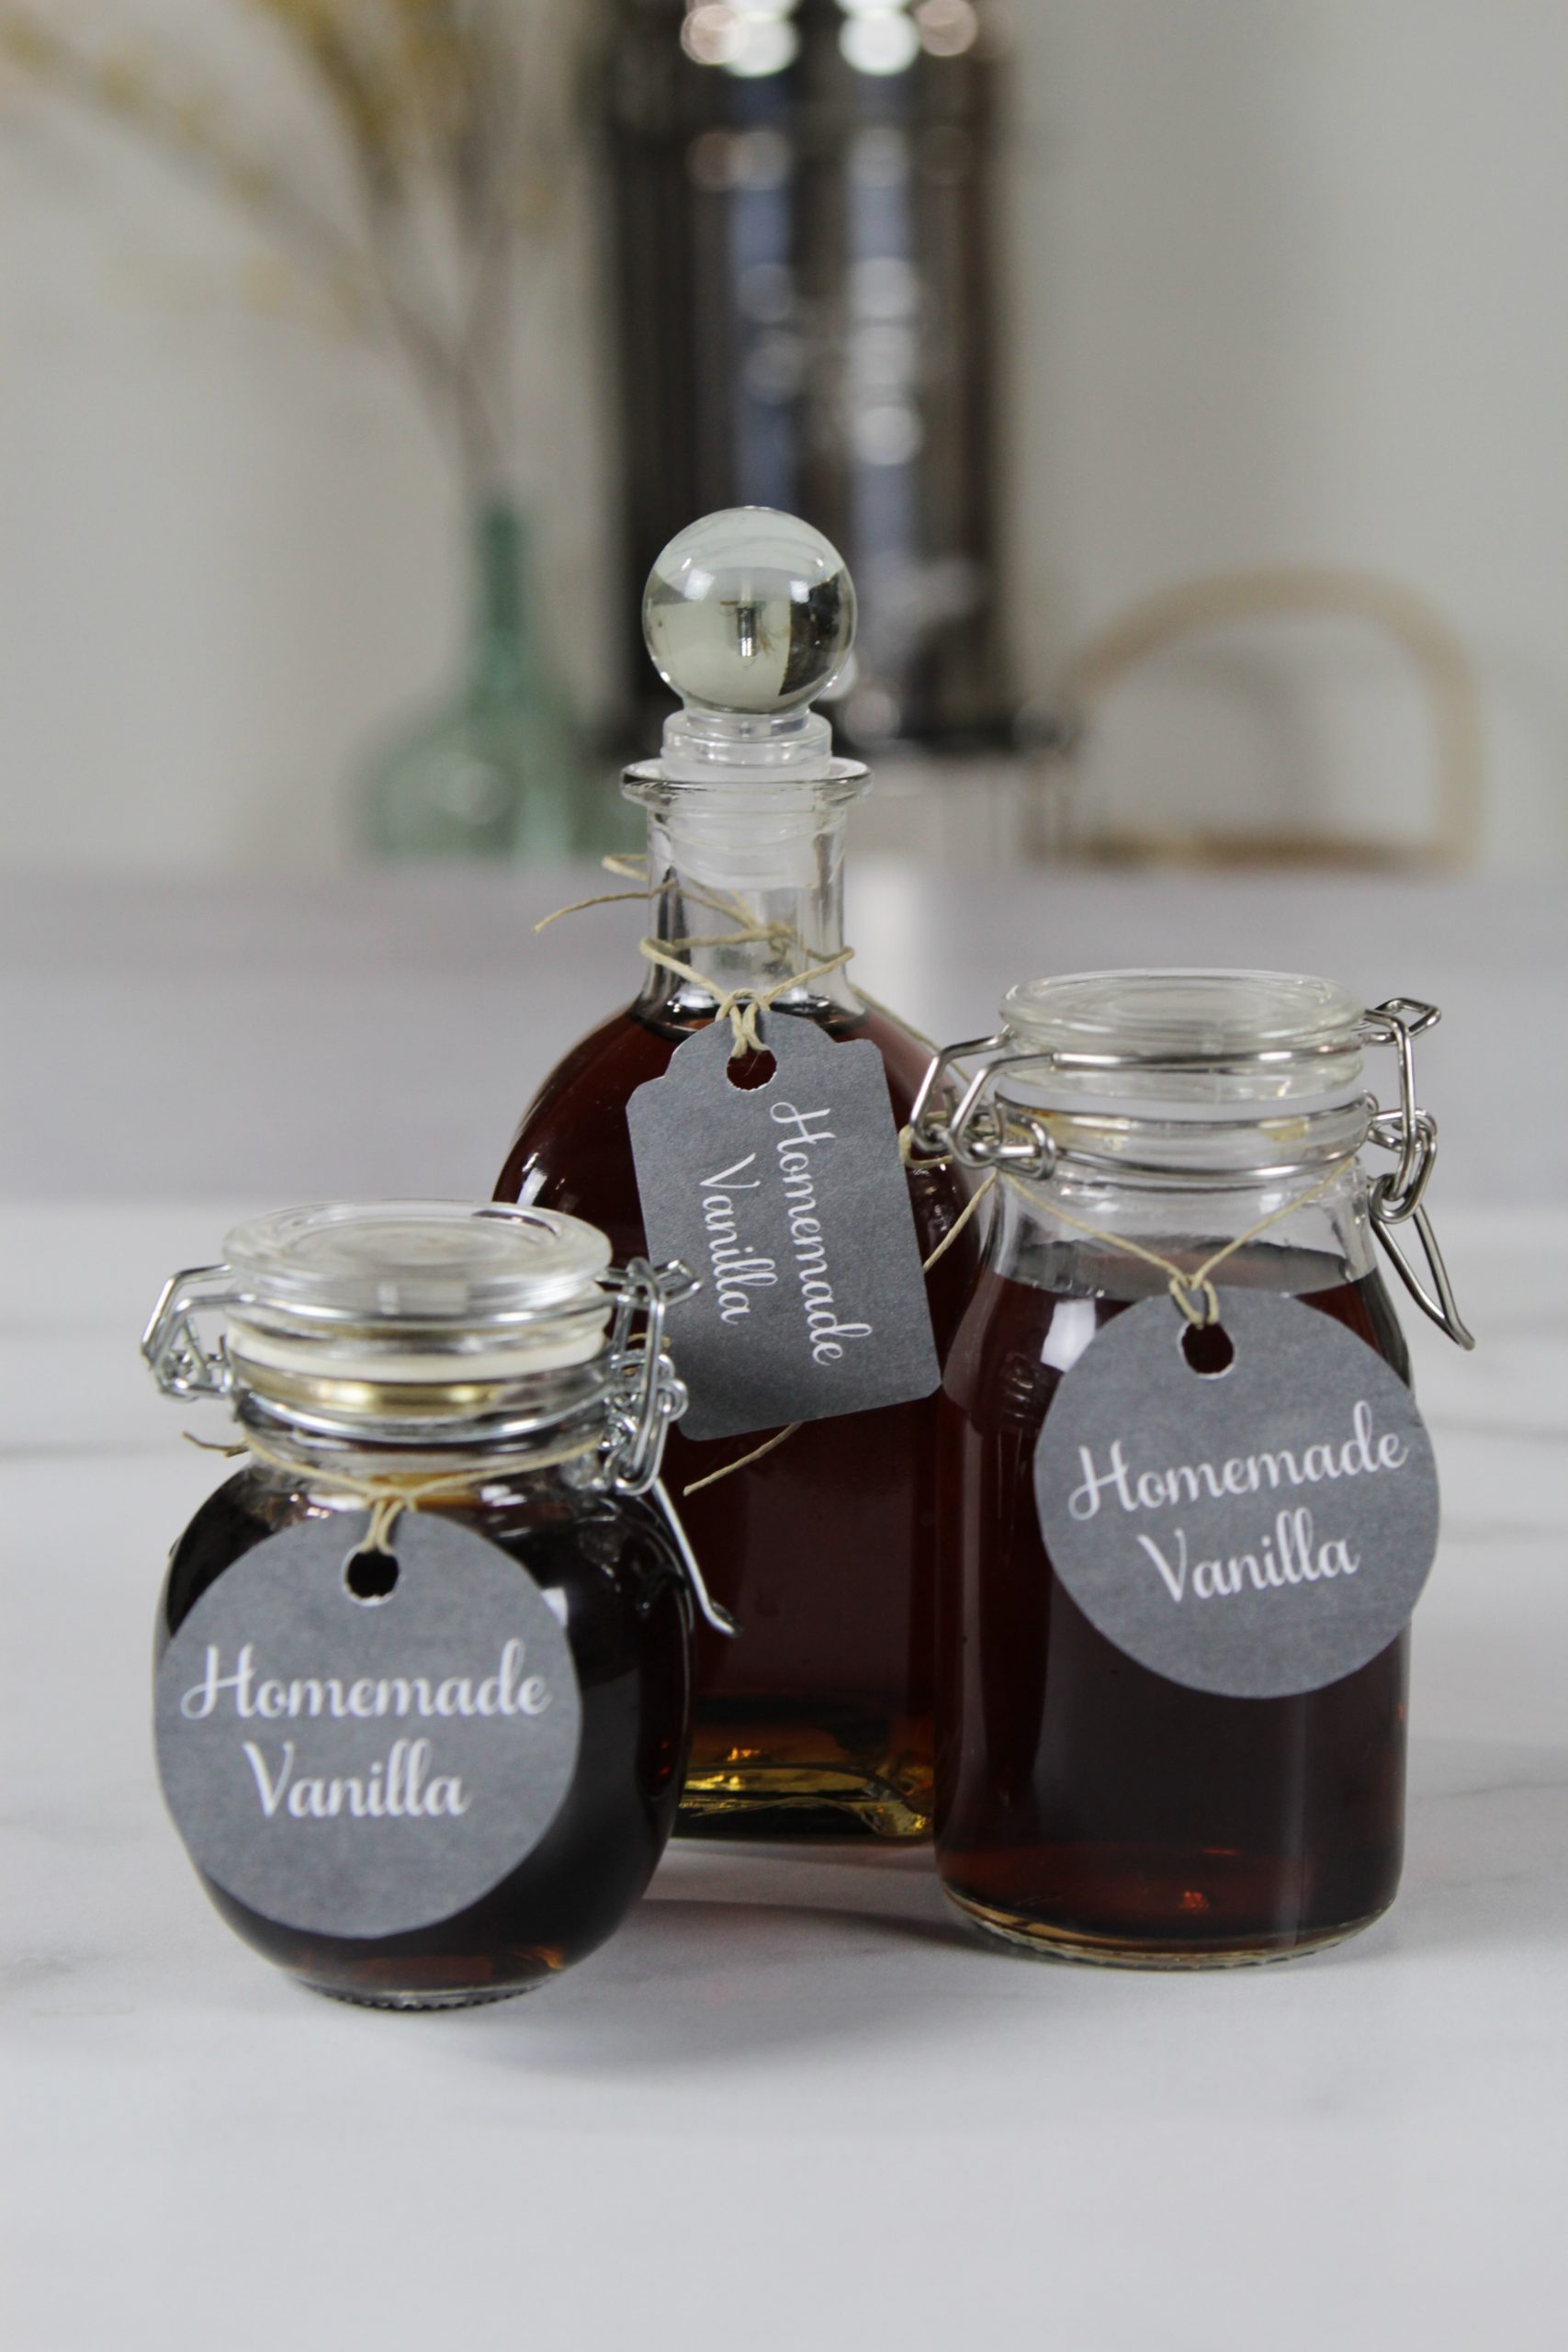 Homemade vanilla made from scratch packaged to give as gifts